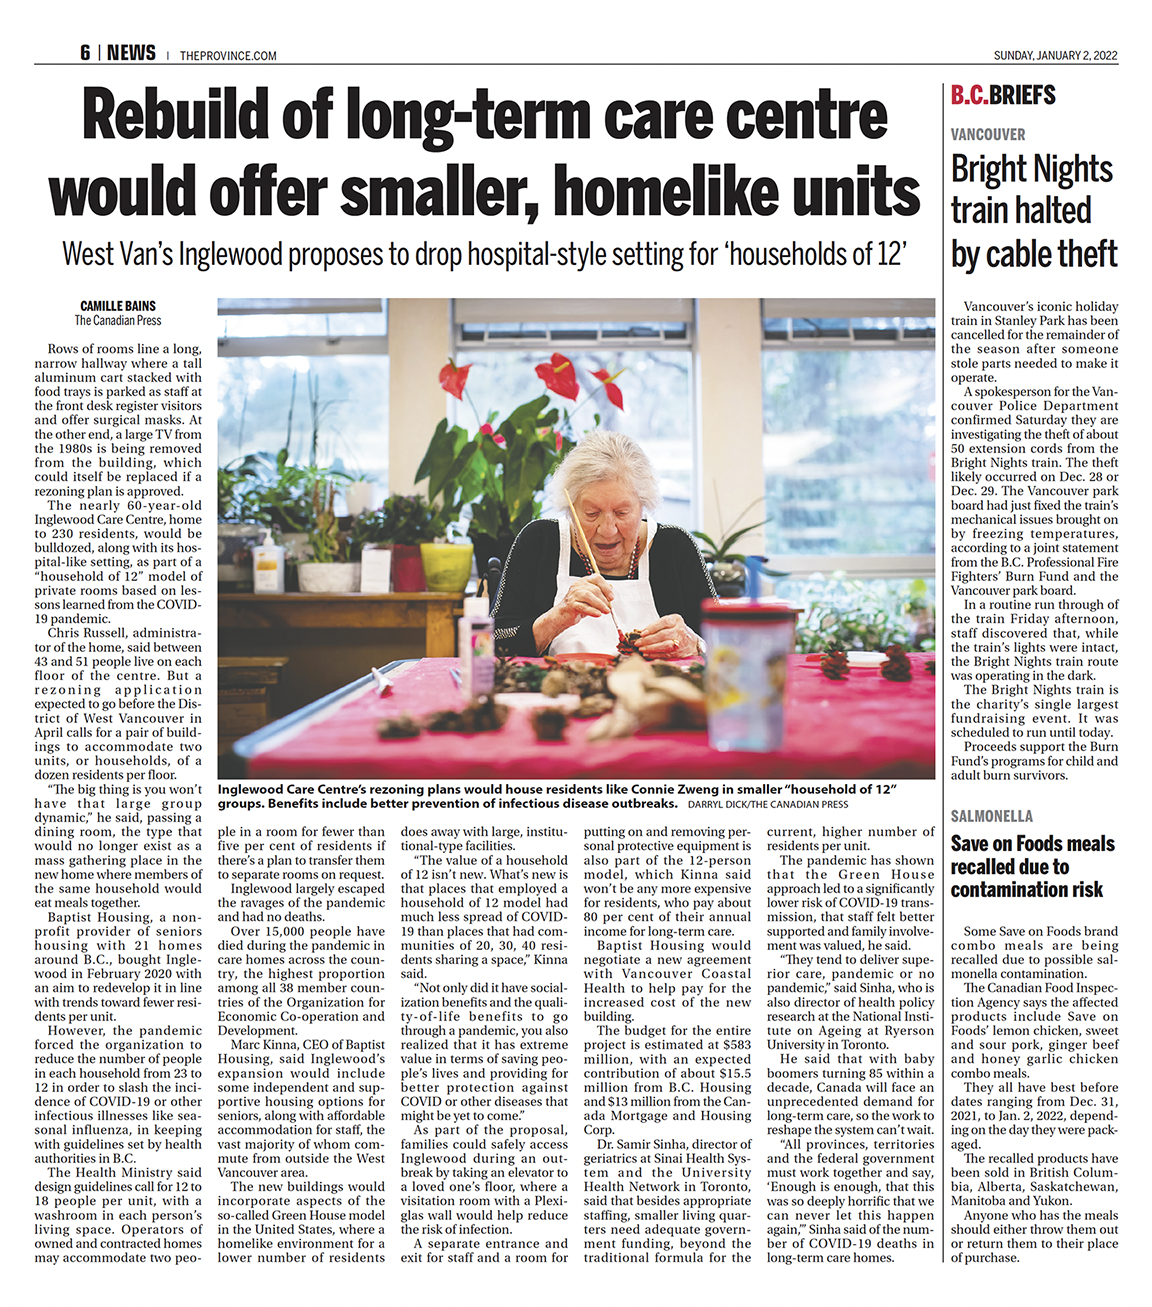 The Province: Rebuild of long-term care centre would offer smaller, homelike units